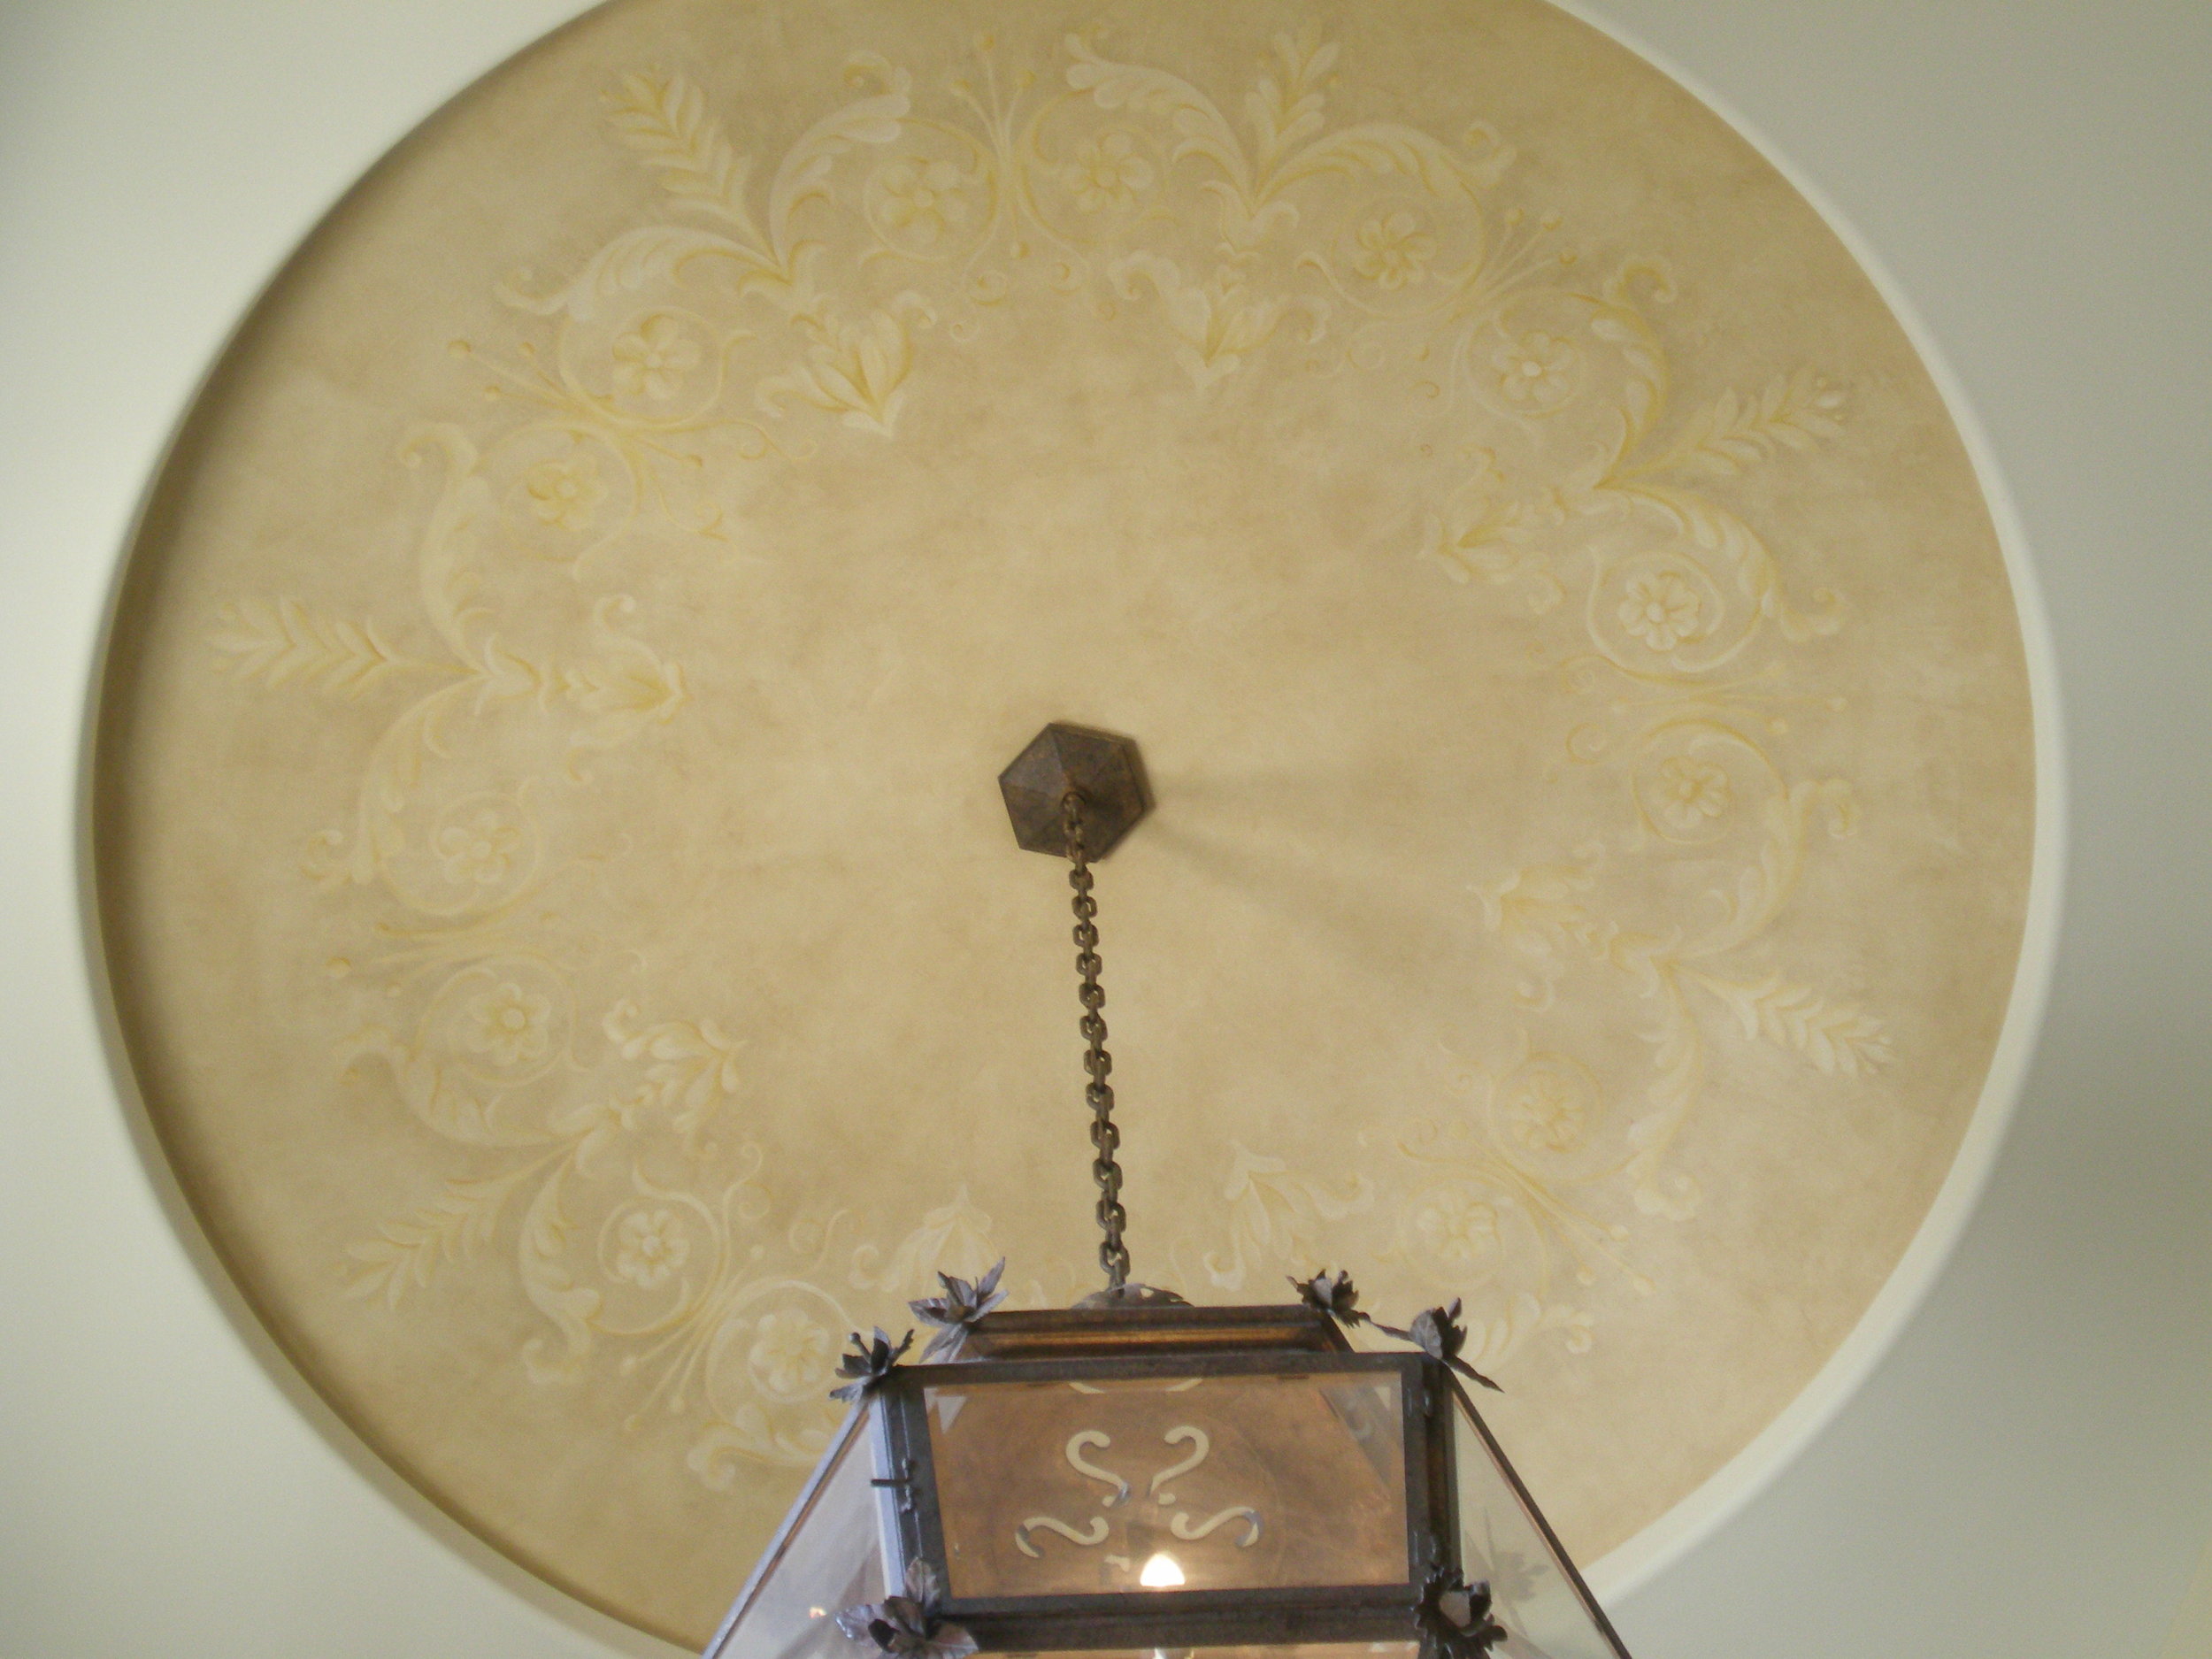 Decorative Dome Mural with Faux Finish